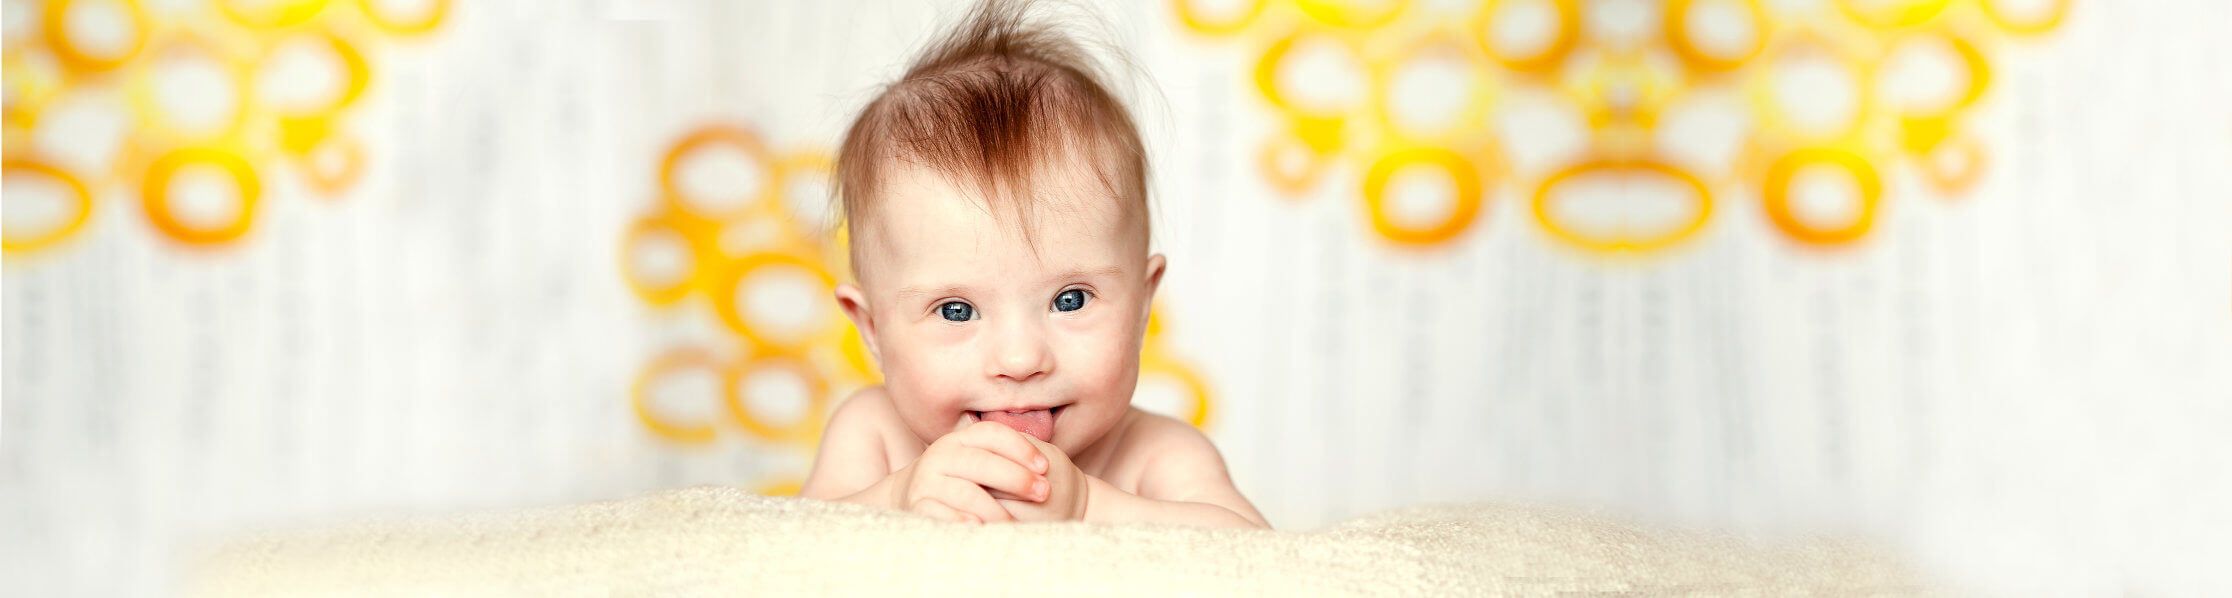 a happy baby laying face-forward propped on elbows looking at camera